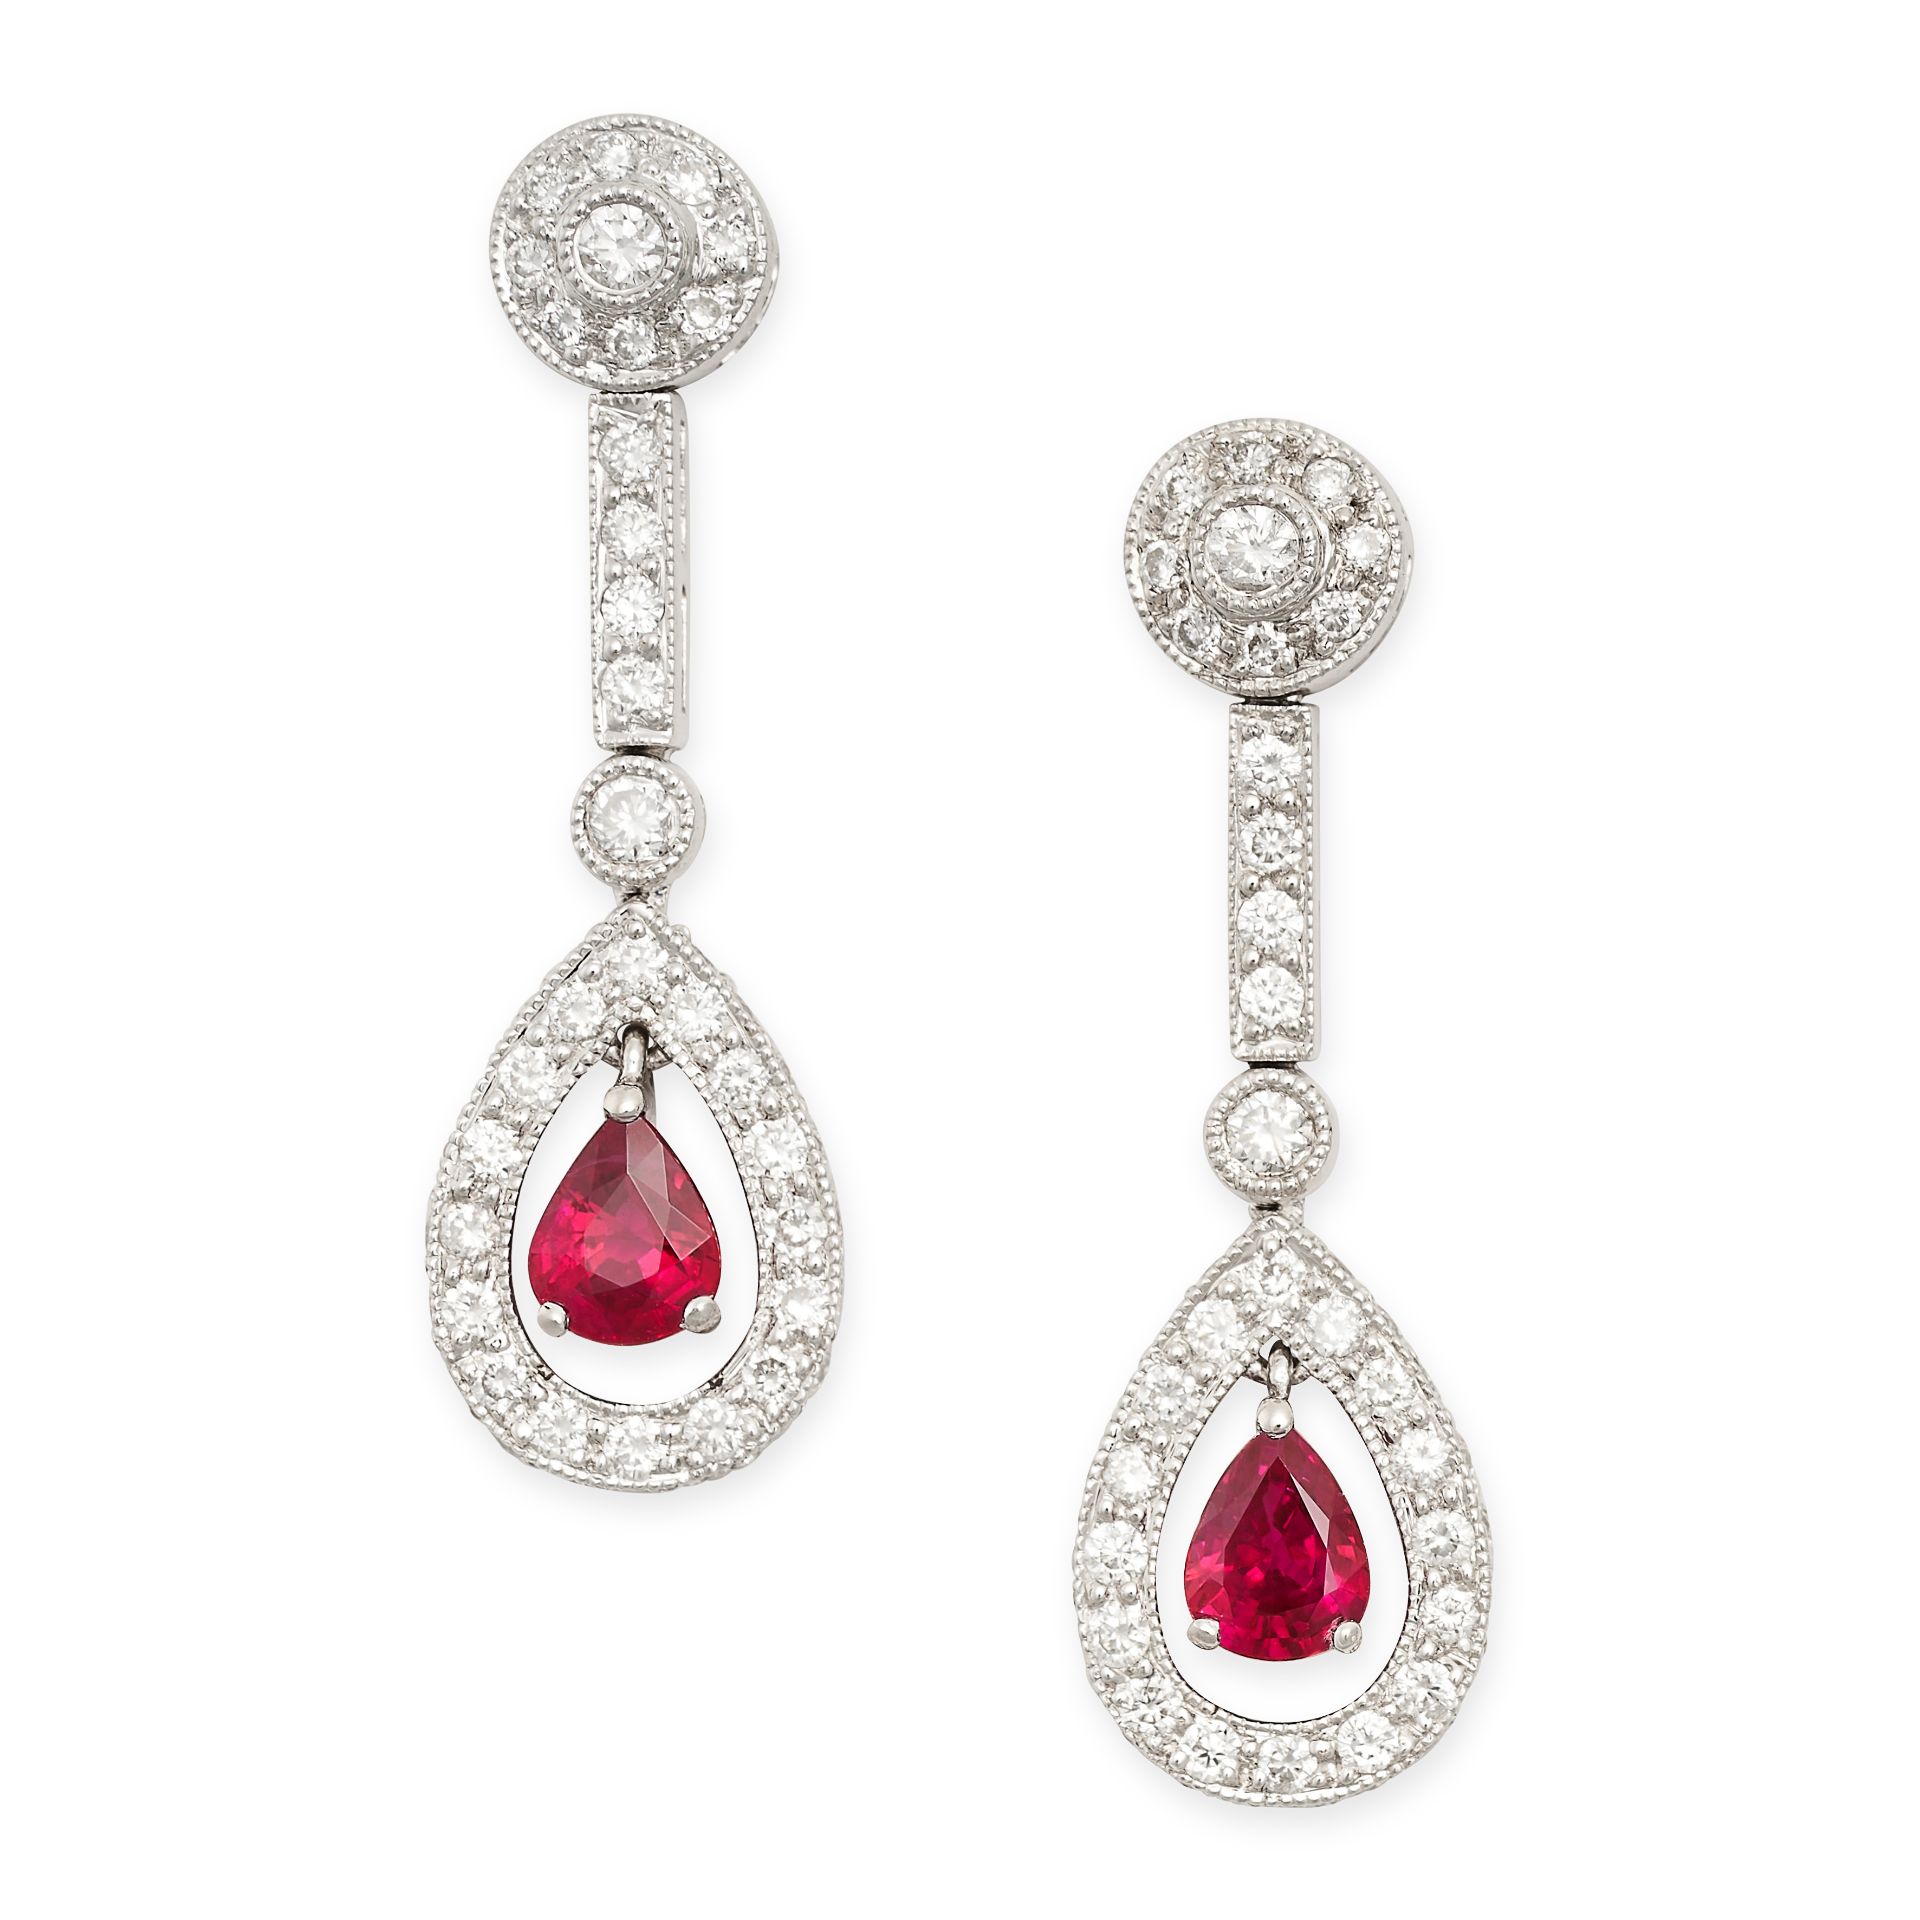 A PAIR OF RUBY AND DIAMOND DROP EARRINGS each set with a pear cut ruby within a border of round